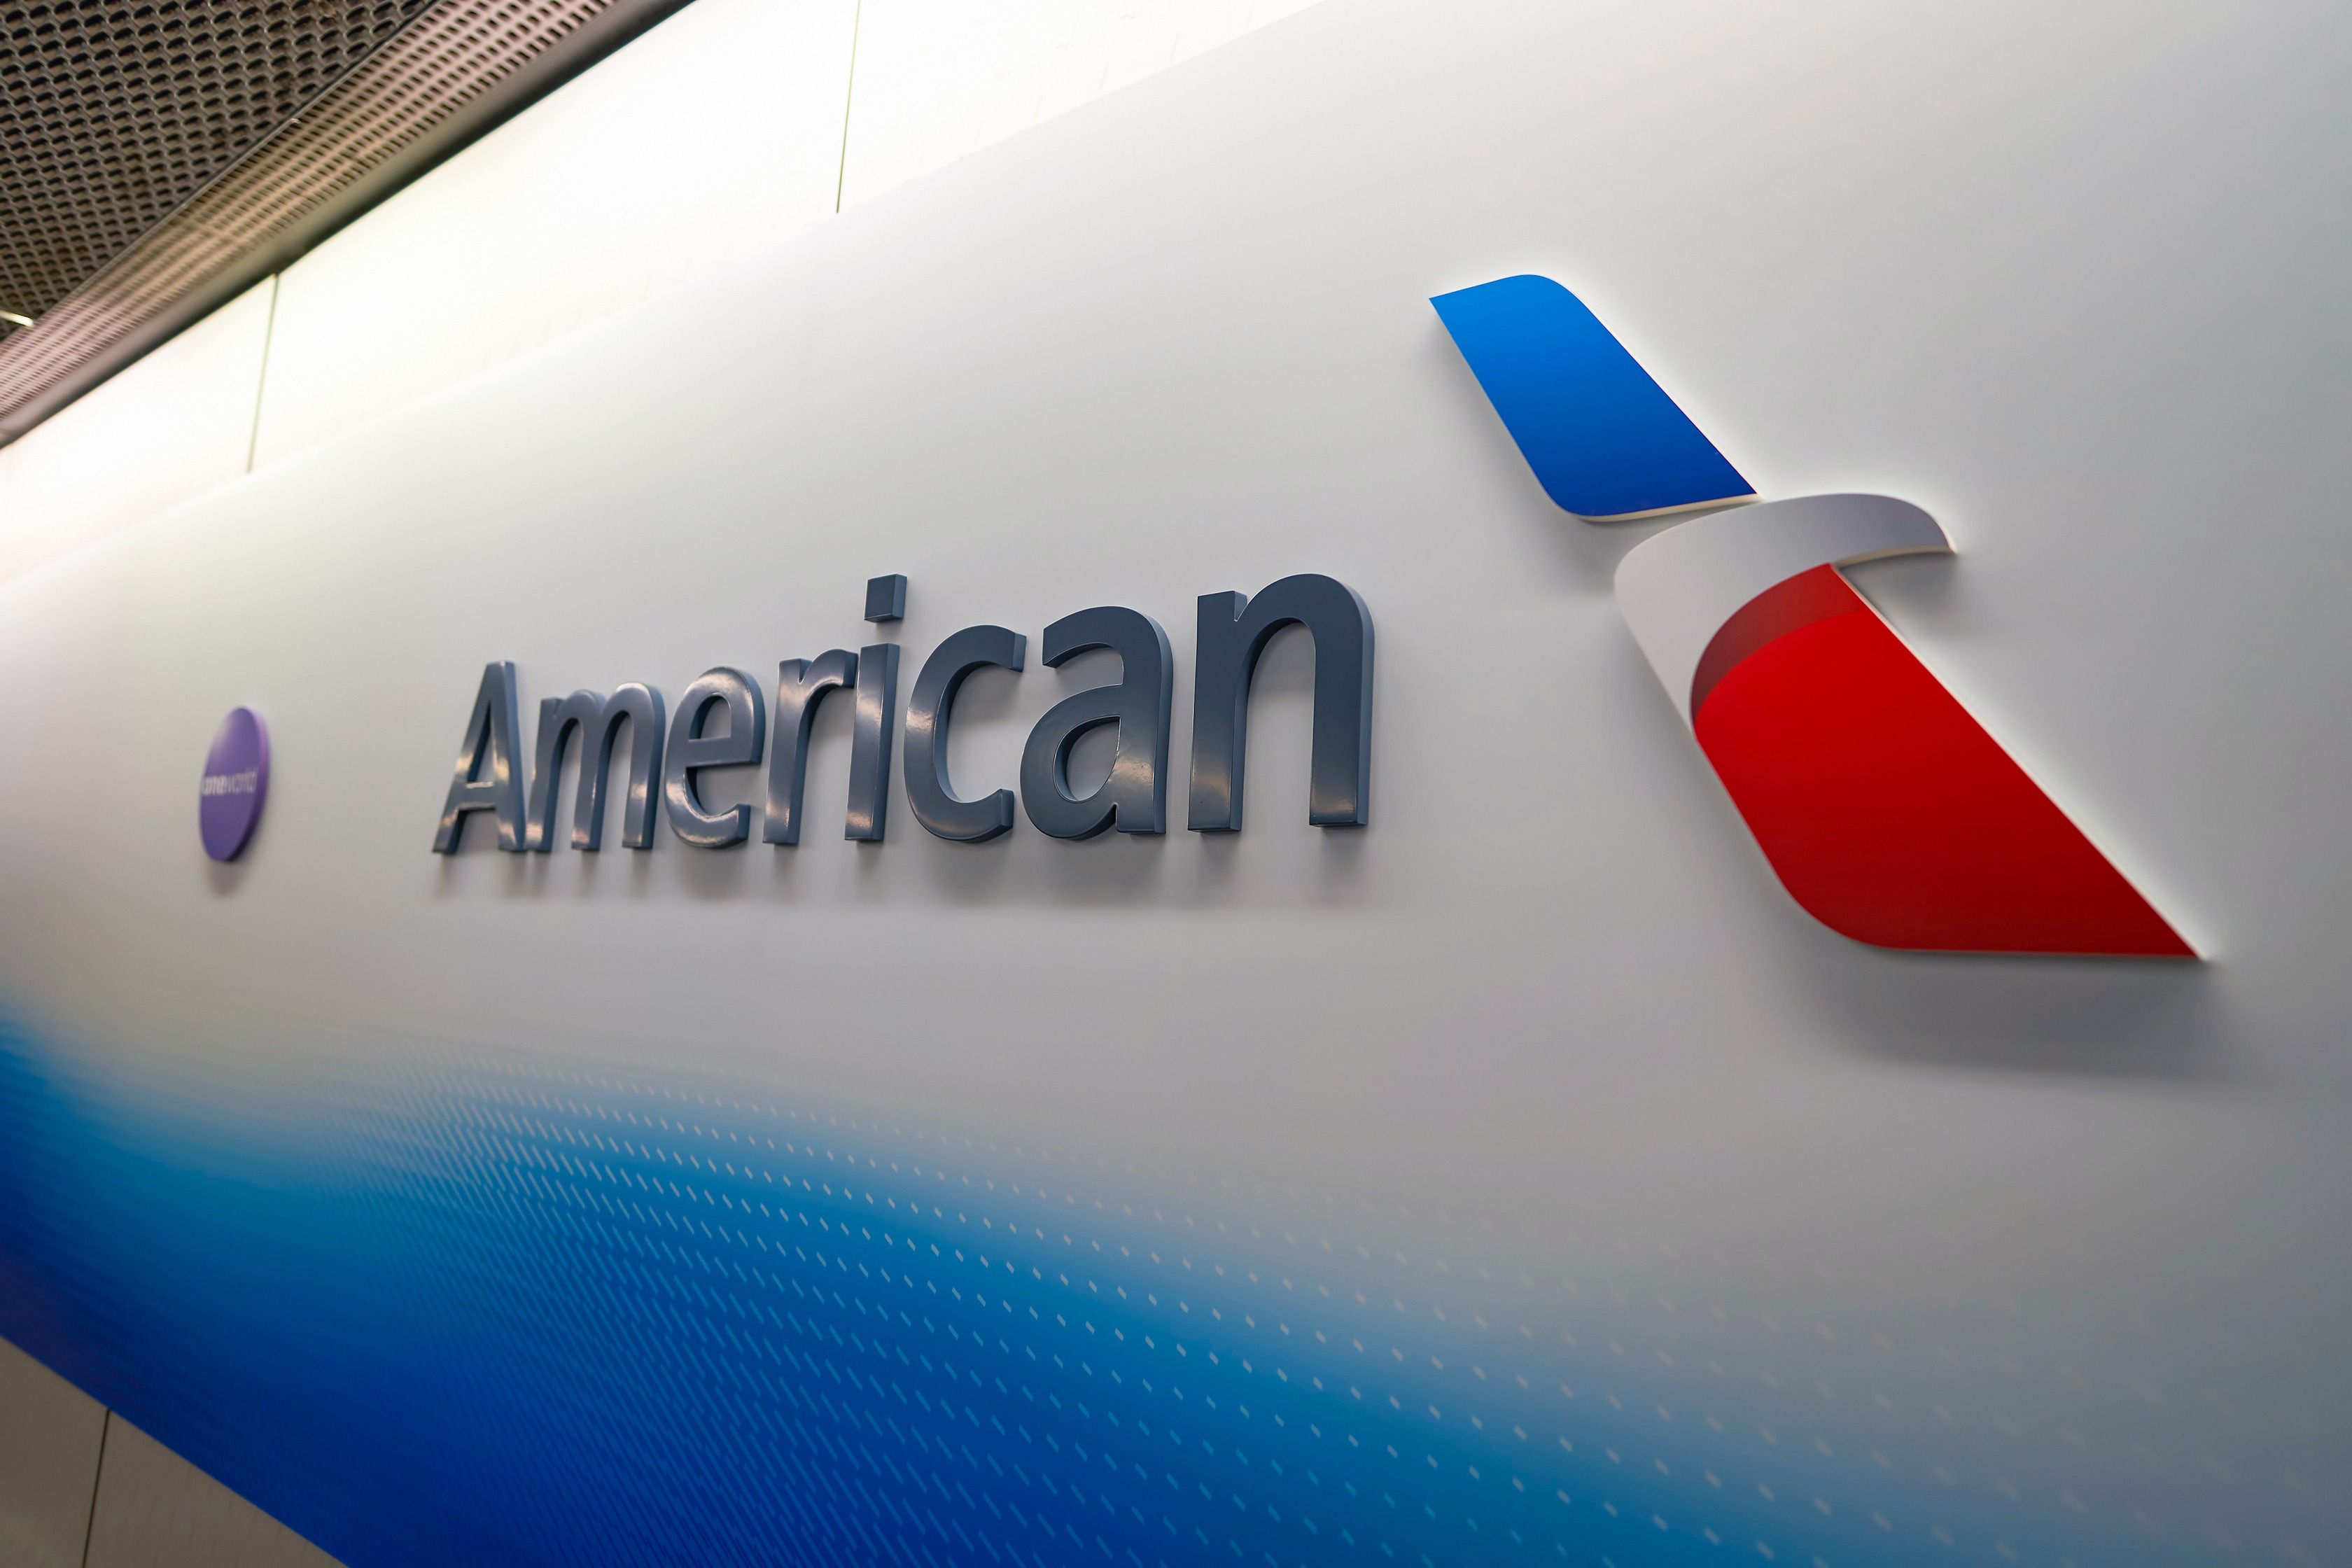 An American Airlines logo near the check in area at an airport.